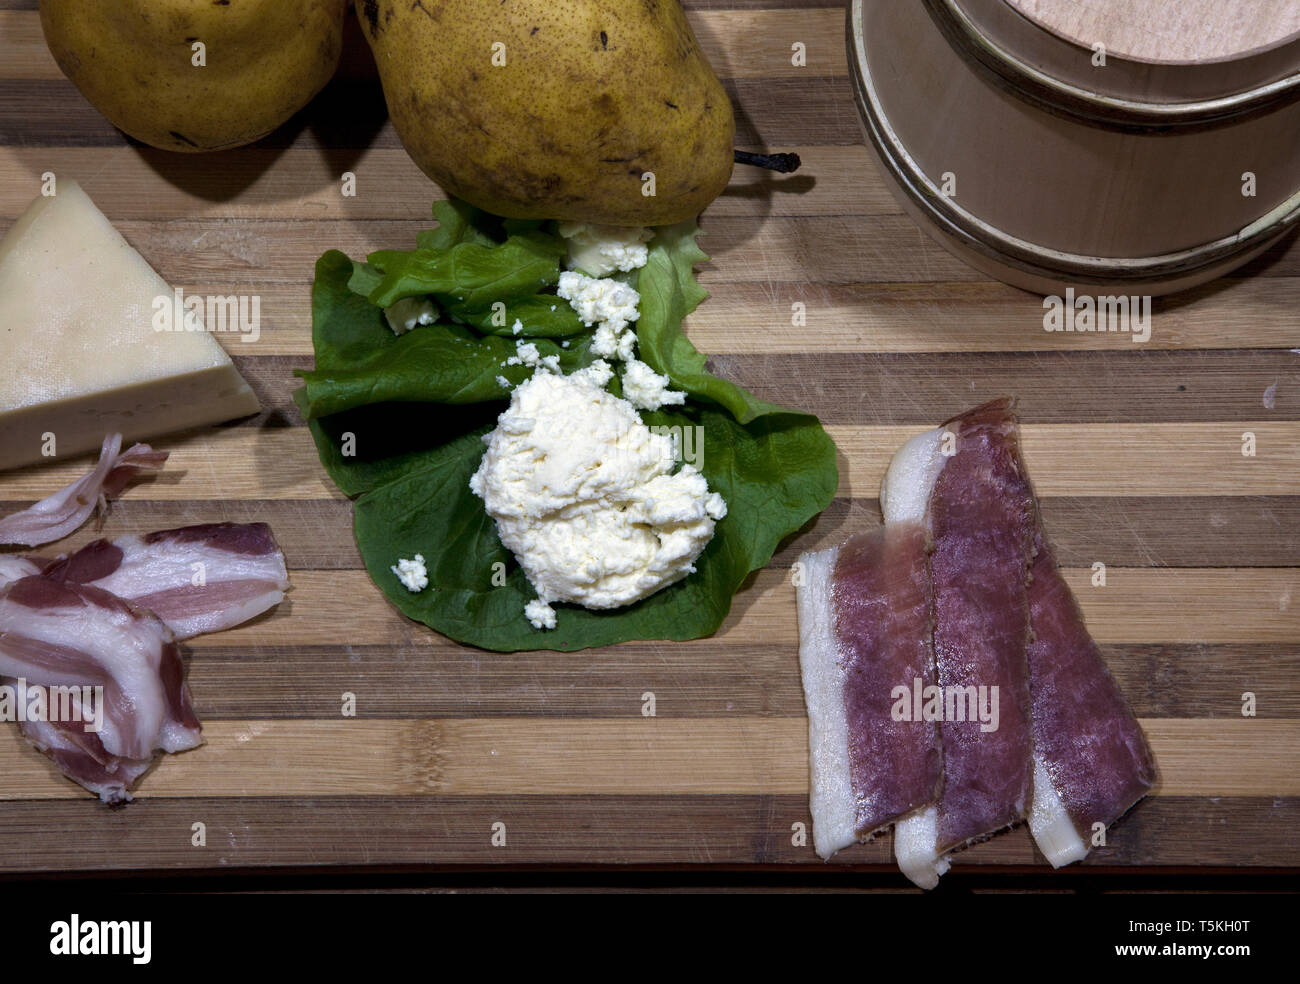 homemade food on a table, prosciutto, cheese, apples, Stock Photo